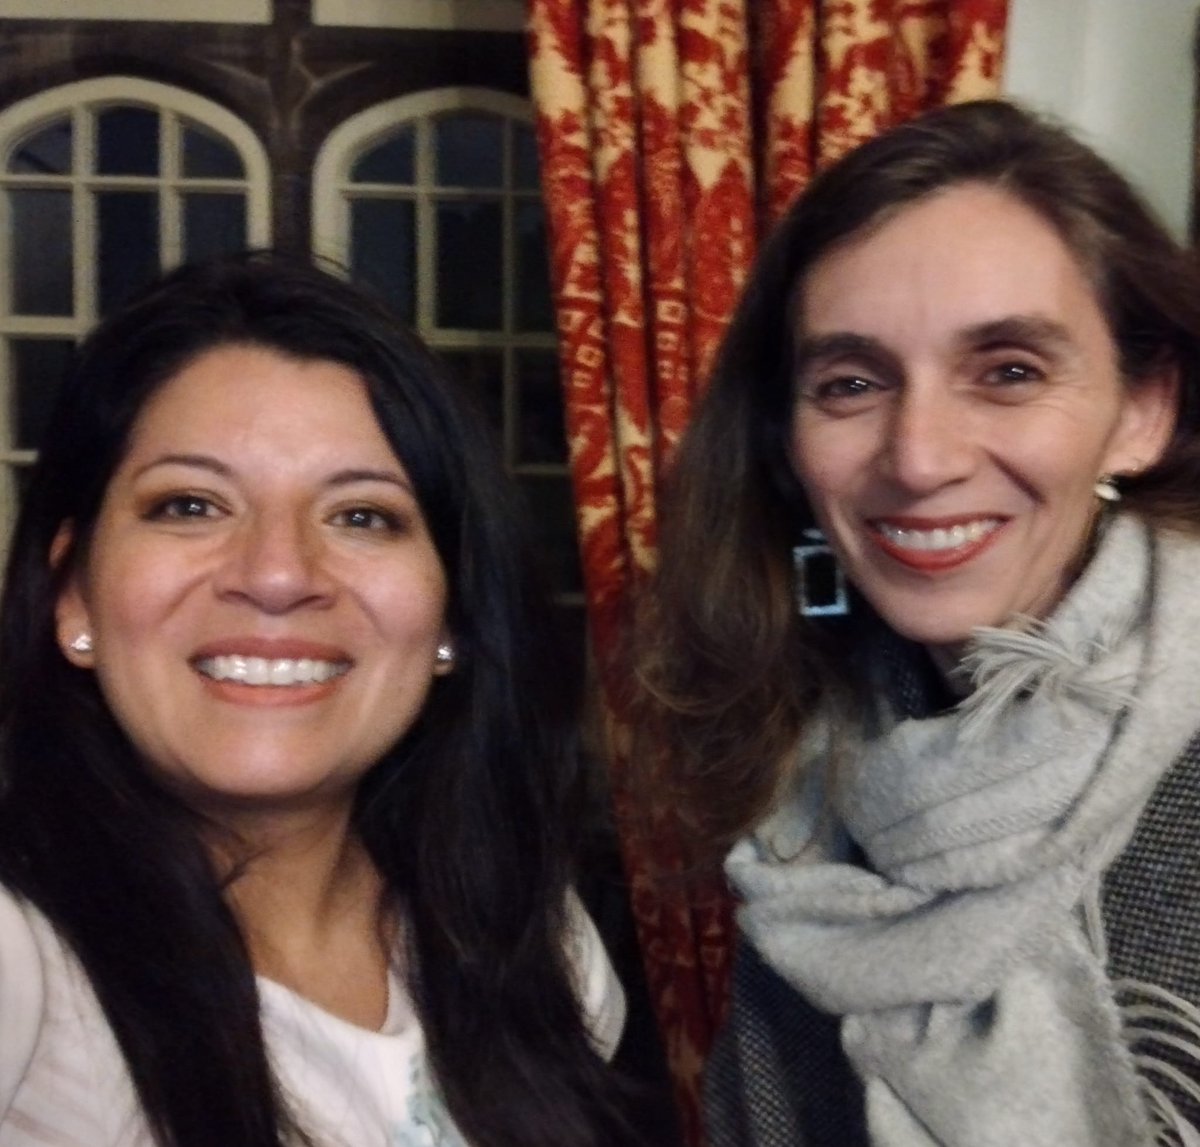 Connecting with talented and inspiring #WomenInSTEM is a natural outcome of #RisingWISE, a programme by and for women, aimed at boosting our #entrepreneurialselves 

Here with Dr @Clarissajaz with whom we share passion & experience in #science4policy

@Cambridge_Uni @UniofOxford